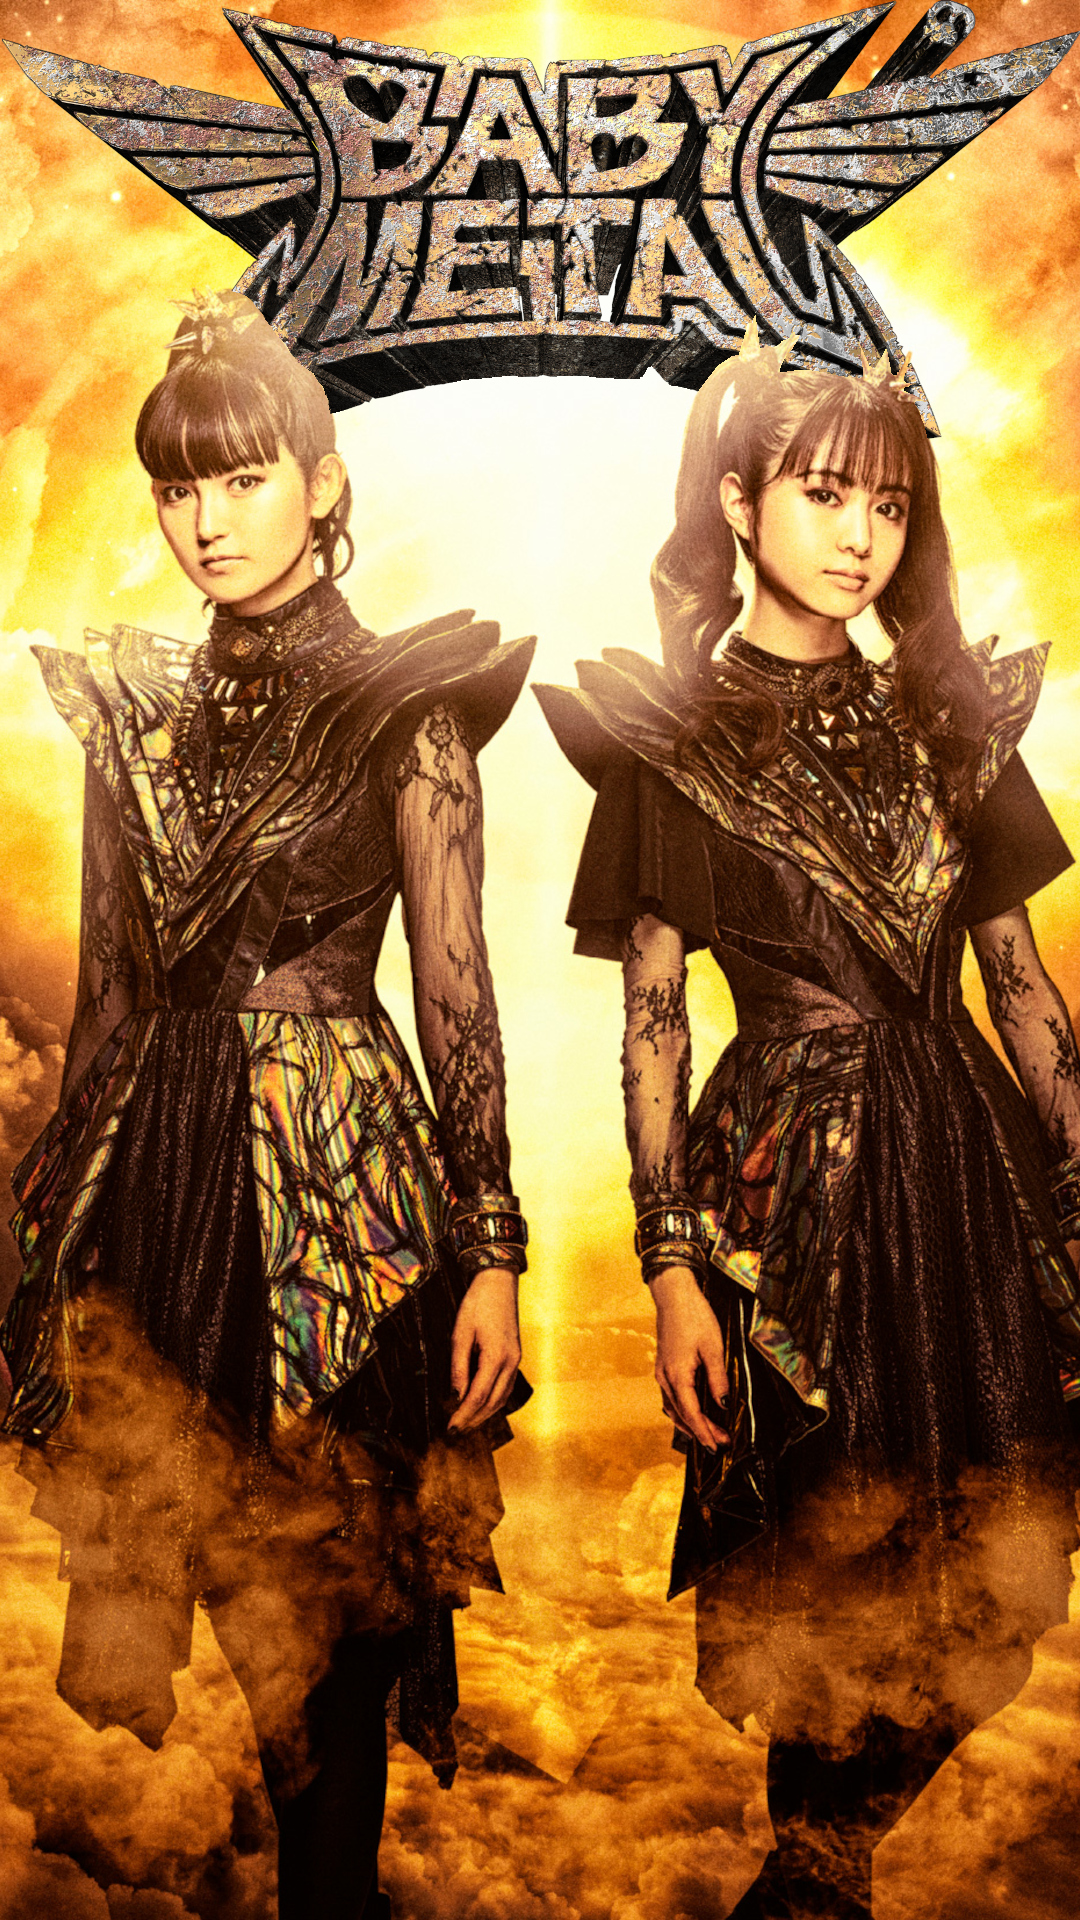 21 Babymetal Happy New Year Android Wallpaper By Lonewolfsg On Deviantart